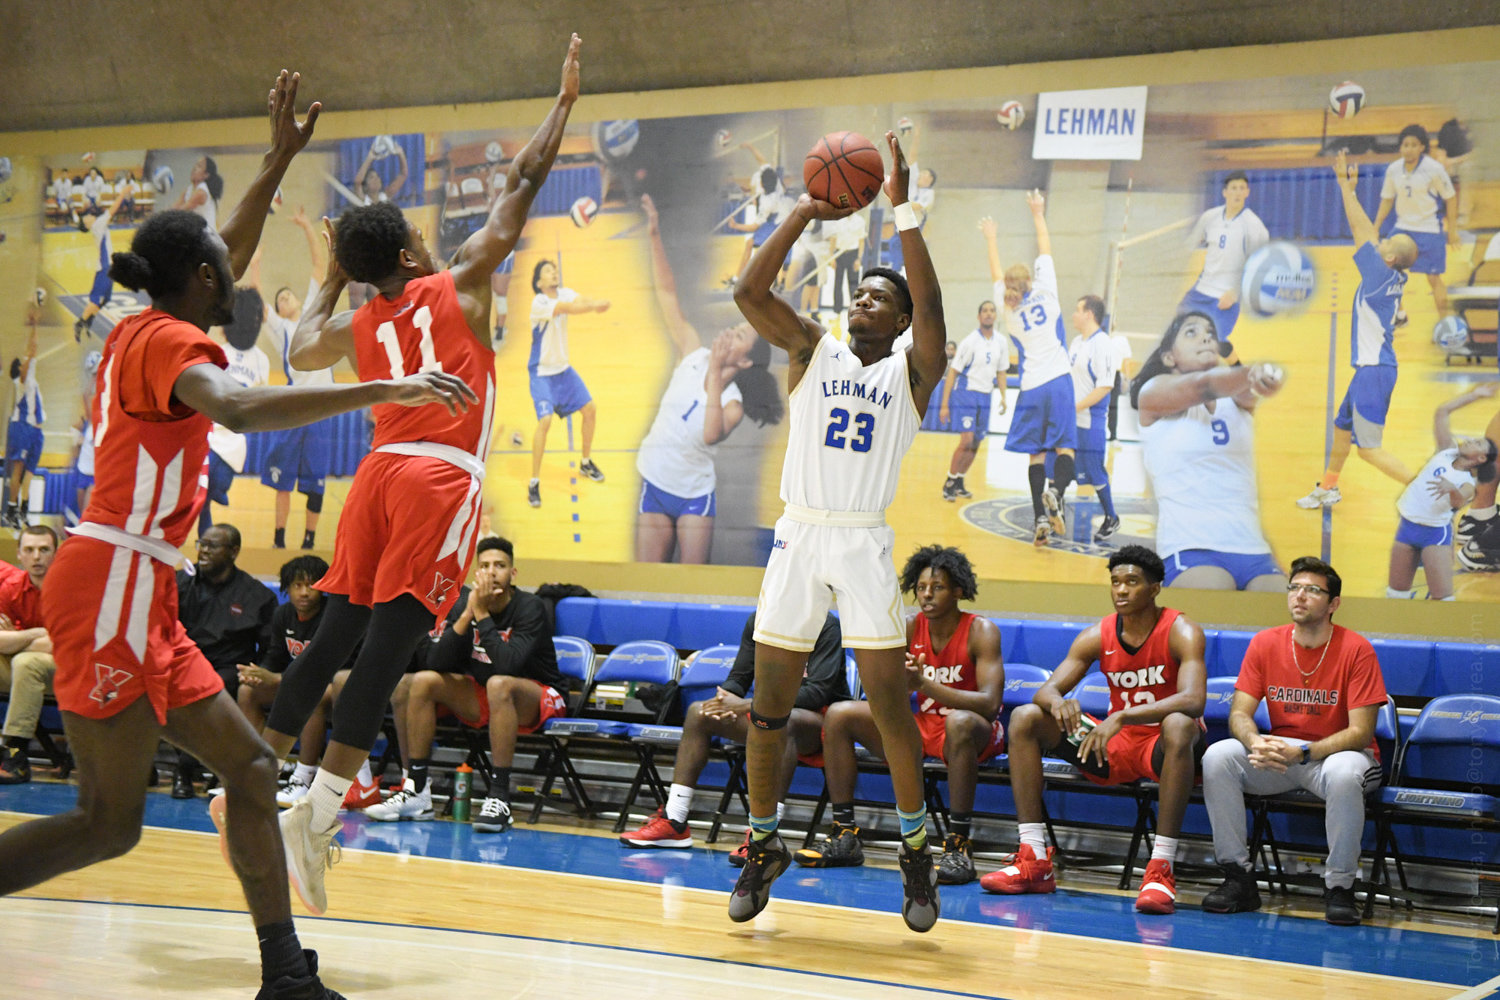 Lehman College junior Isaiah Geathers scored a combined 29 points in the Lightning’s two games last week, finishing 1-1 in CUNYAC play.